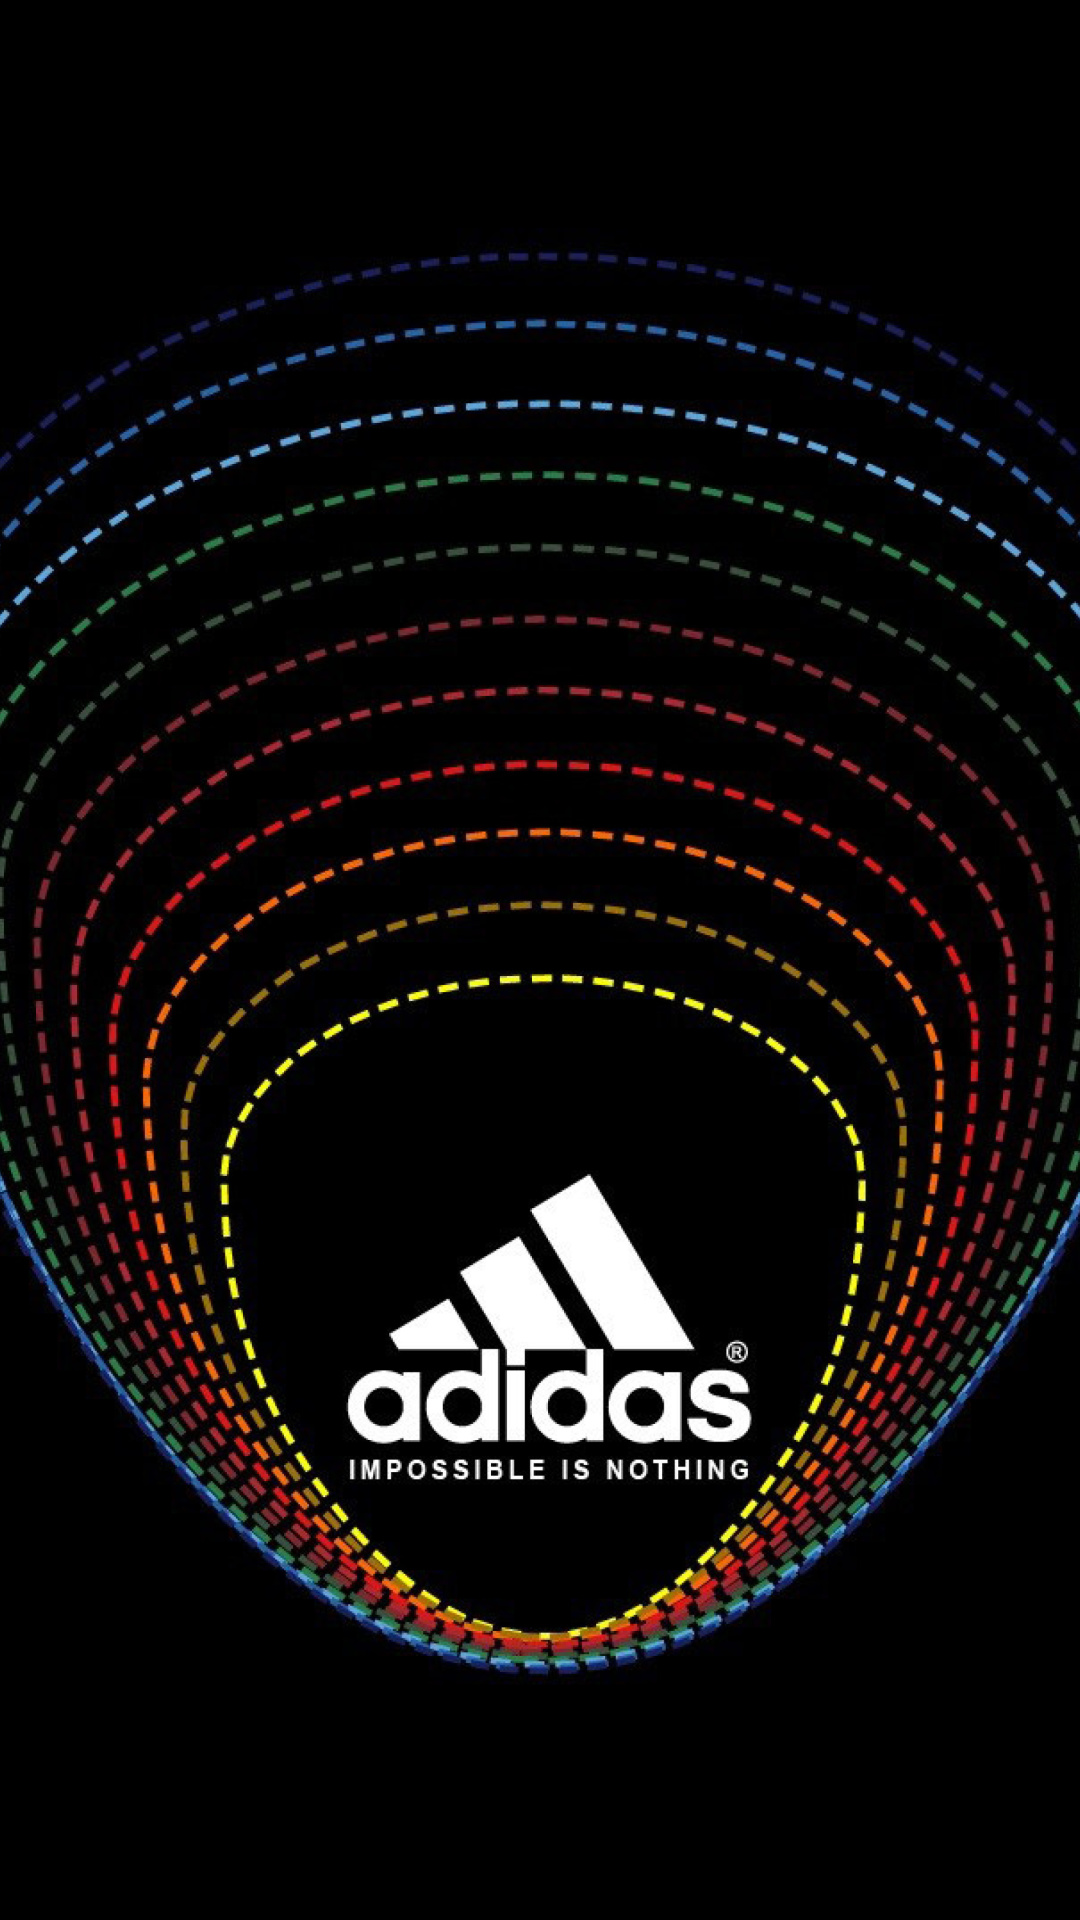 Adidas Tagline, Impossible is Nothing wallpaper 1080x1920